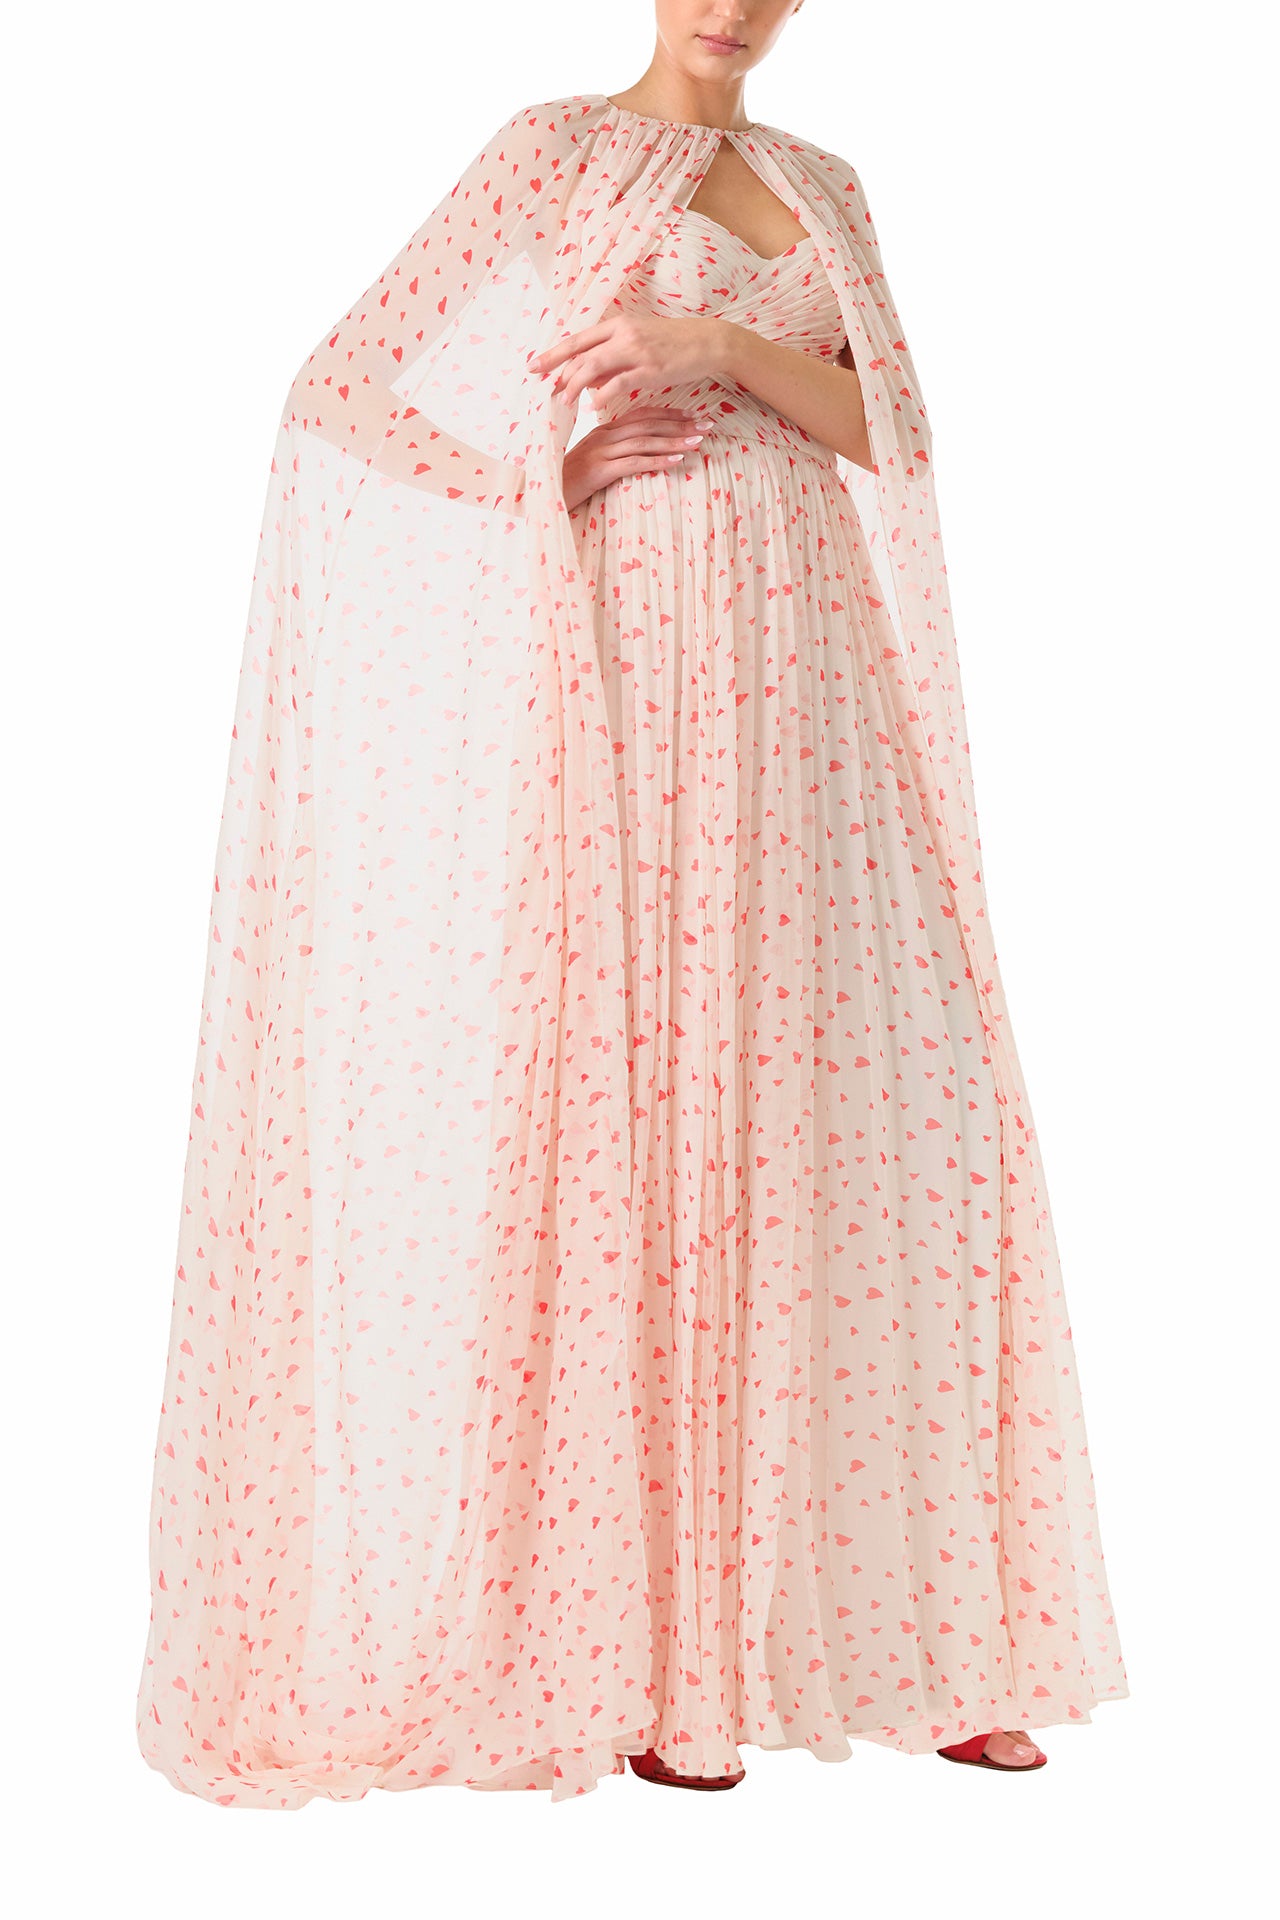 Monique Lhuillier Fall 2024 strapless chiffon gown with gathered sweetheart bodice in heart printed chiffon fabric - front with matching cape.